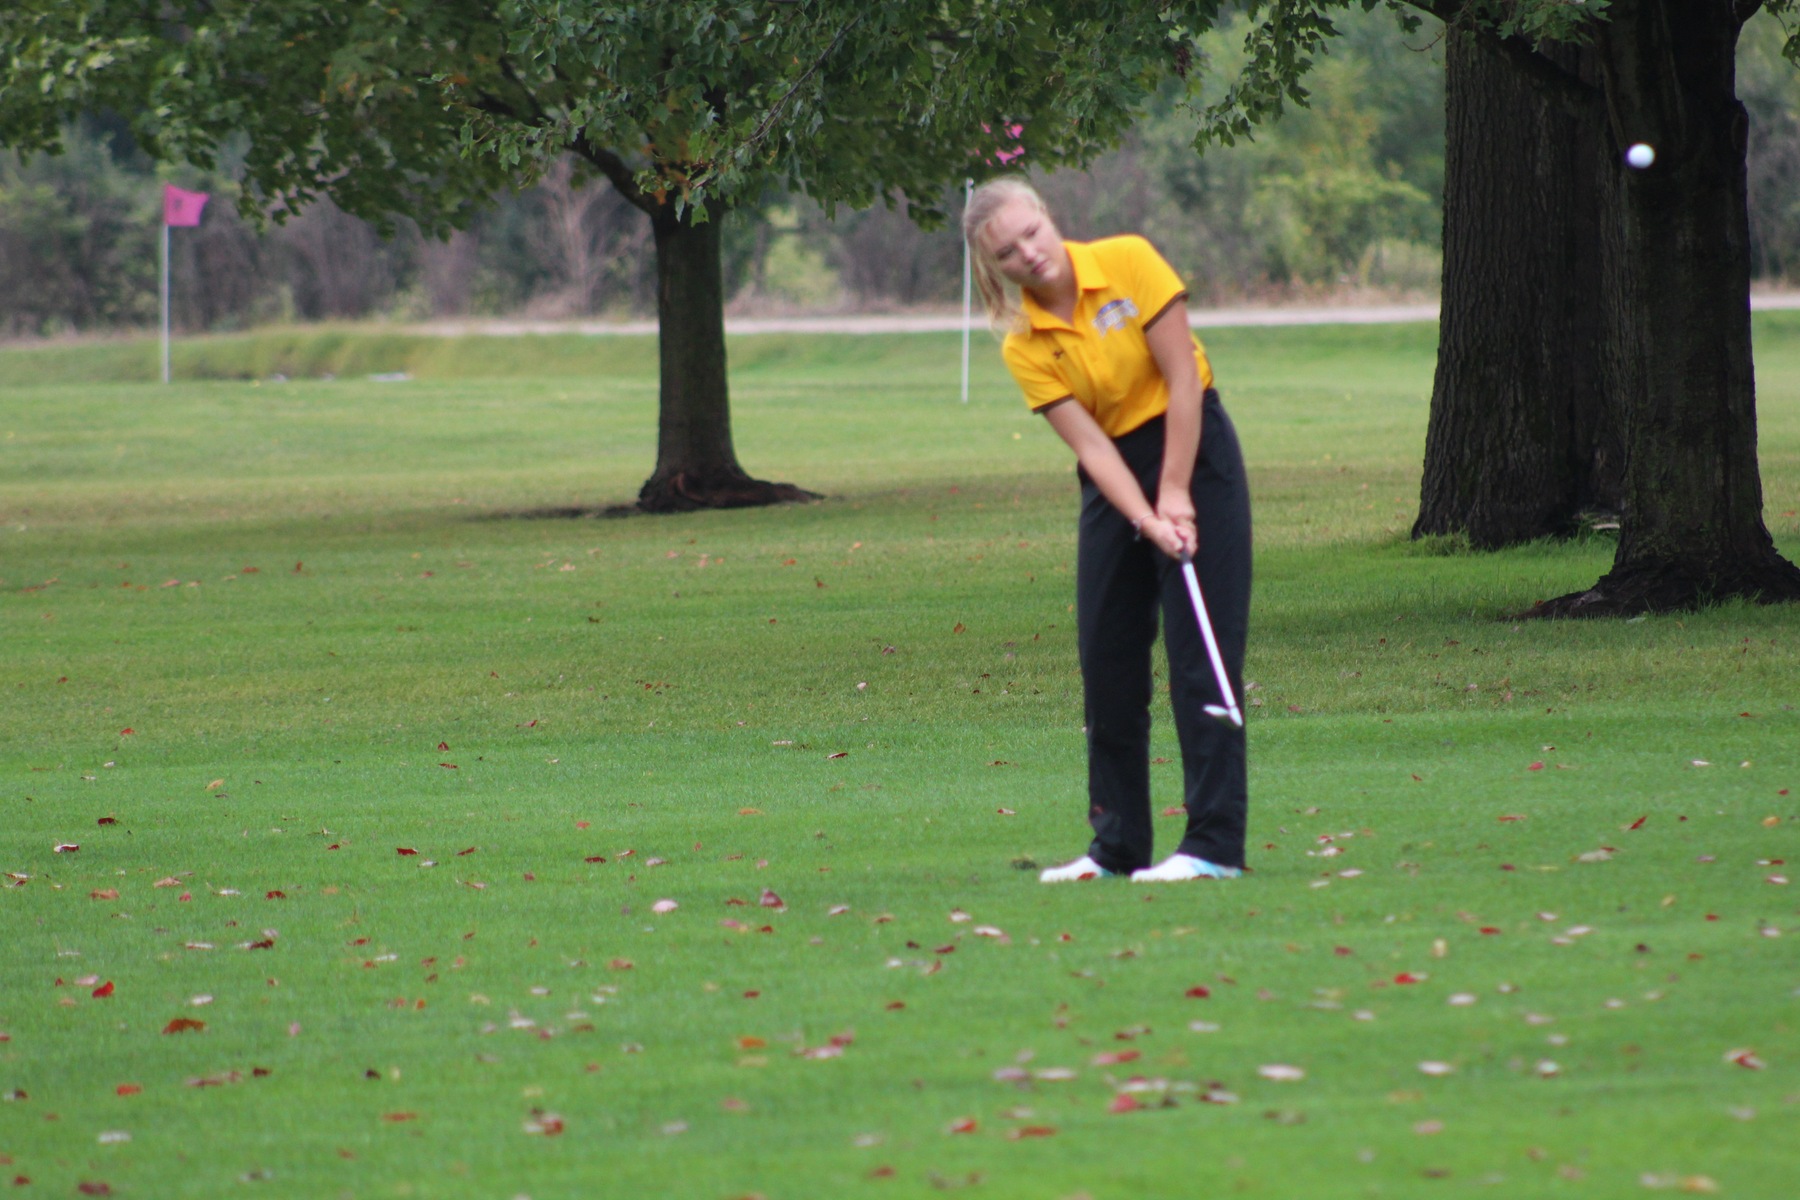 NIACC's Thea Lunning chips onto the ninth green during Thursday's NIACC Fall Invitational at the Mason City Country Club.